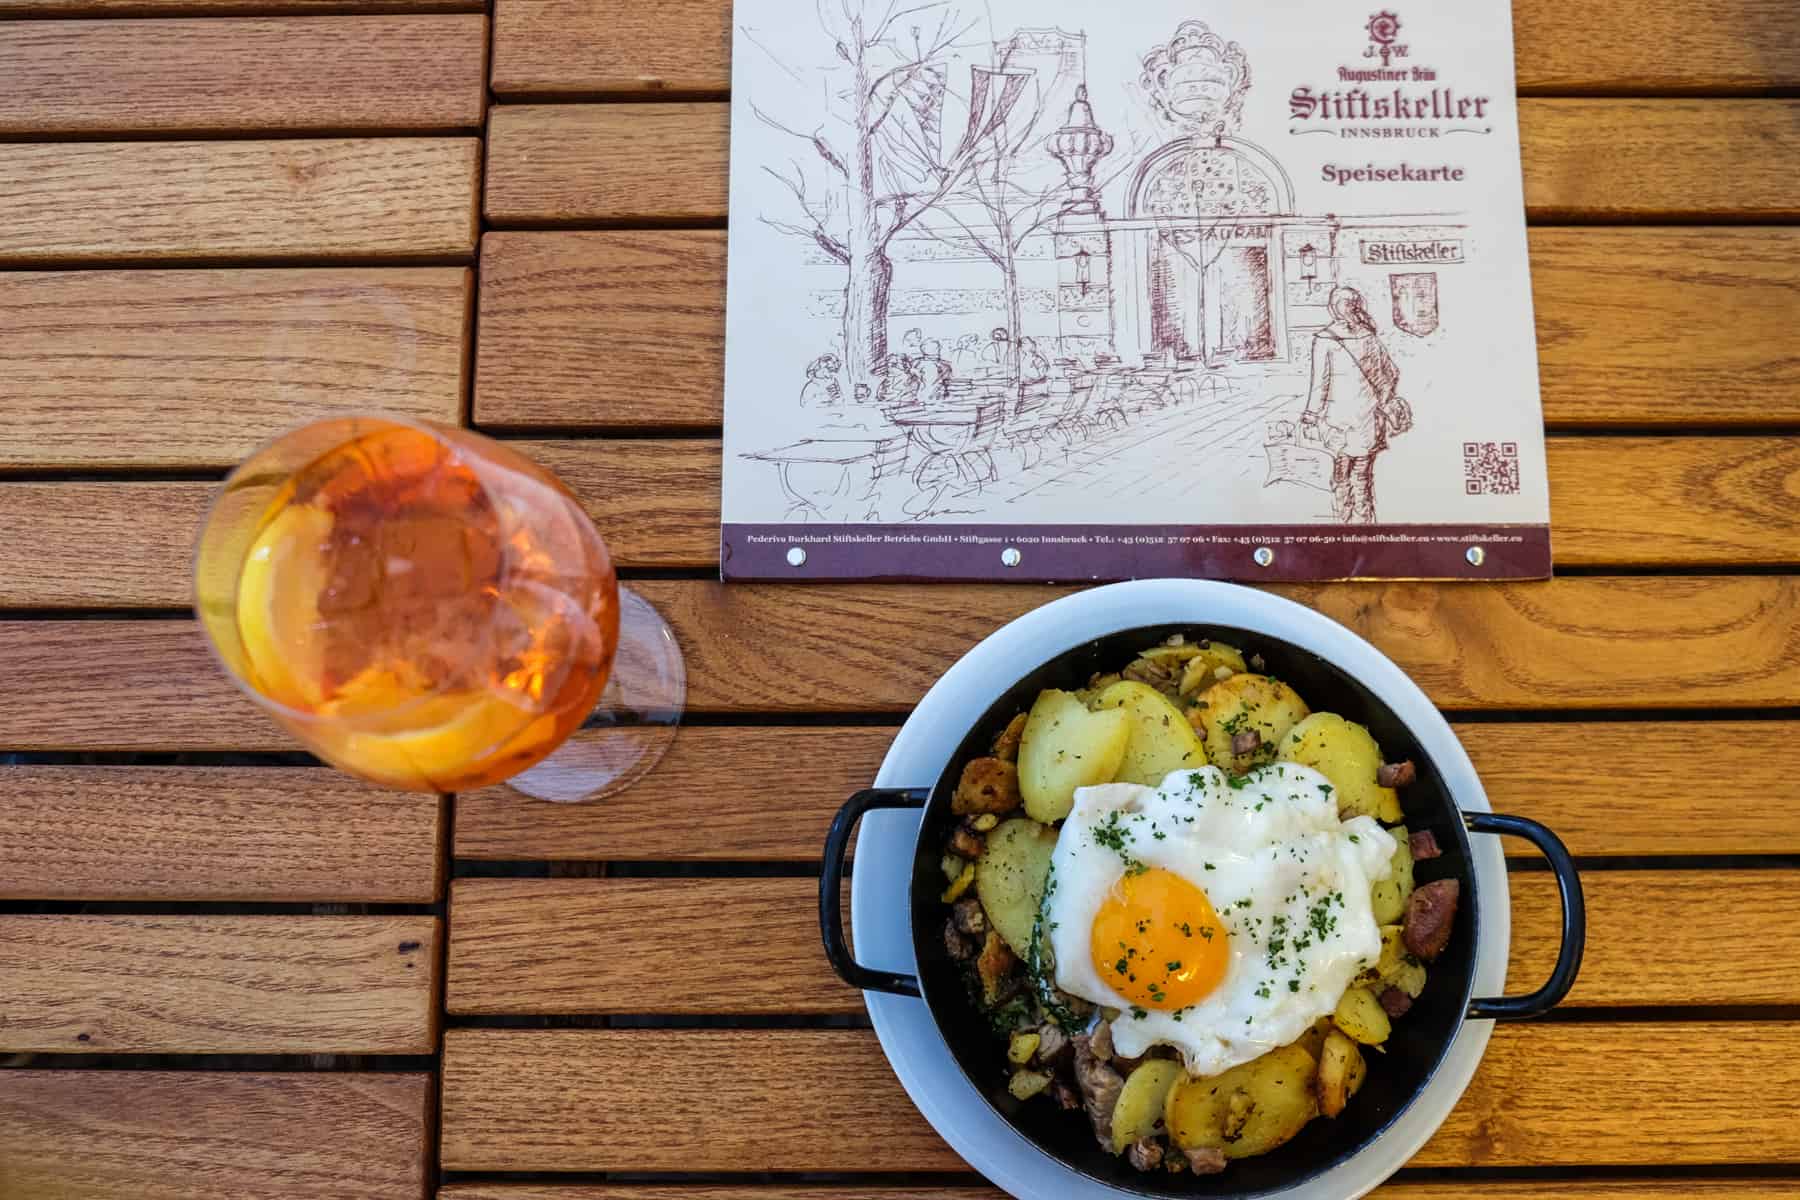 An iron plate of Tiroler Gröstl with meat, potatoes and egg, served on a wooden table at a traditional Austrian food restaurant in Innsbruck